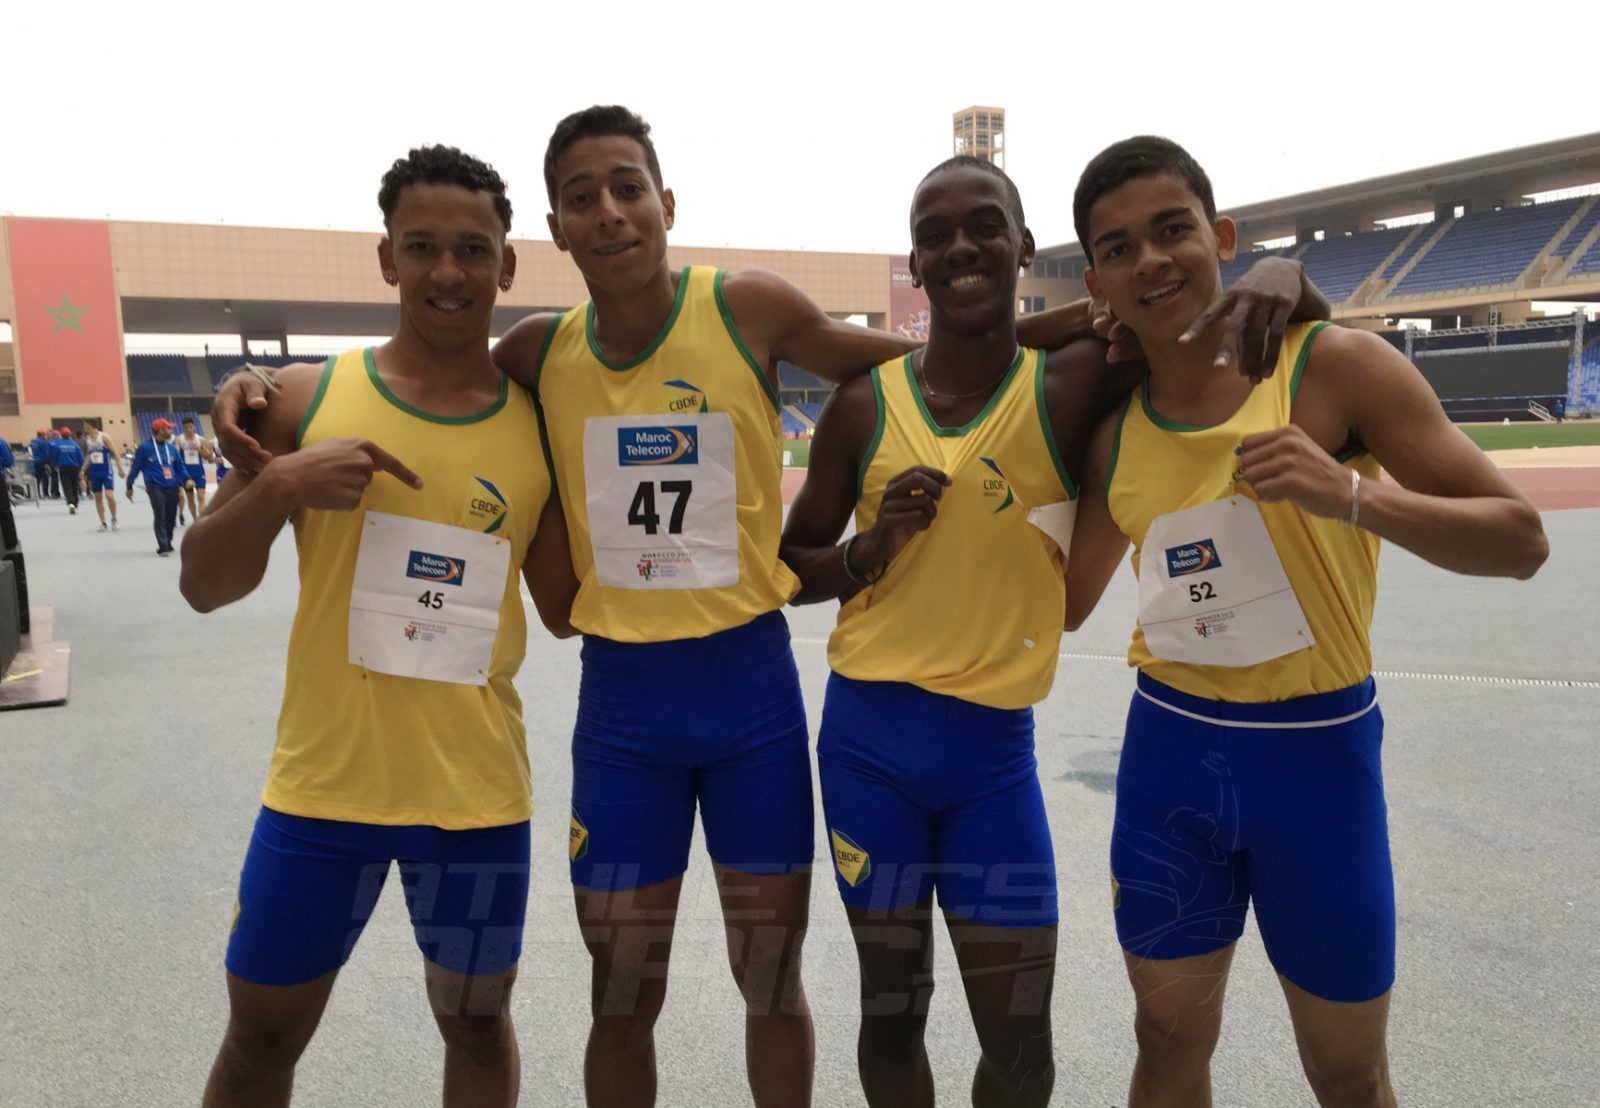 The Brazilian quartet in the Boys 4x100m final at Gymnasiade 2018 in Marrakech / Photo Credit: Yomi Omogbeja